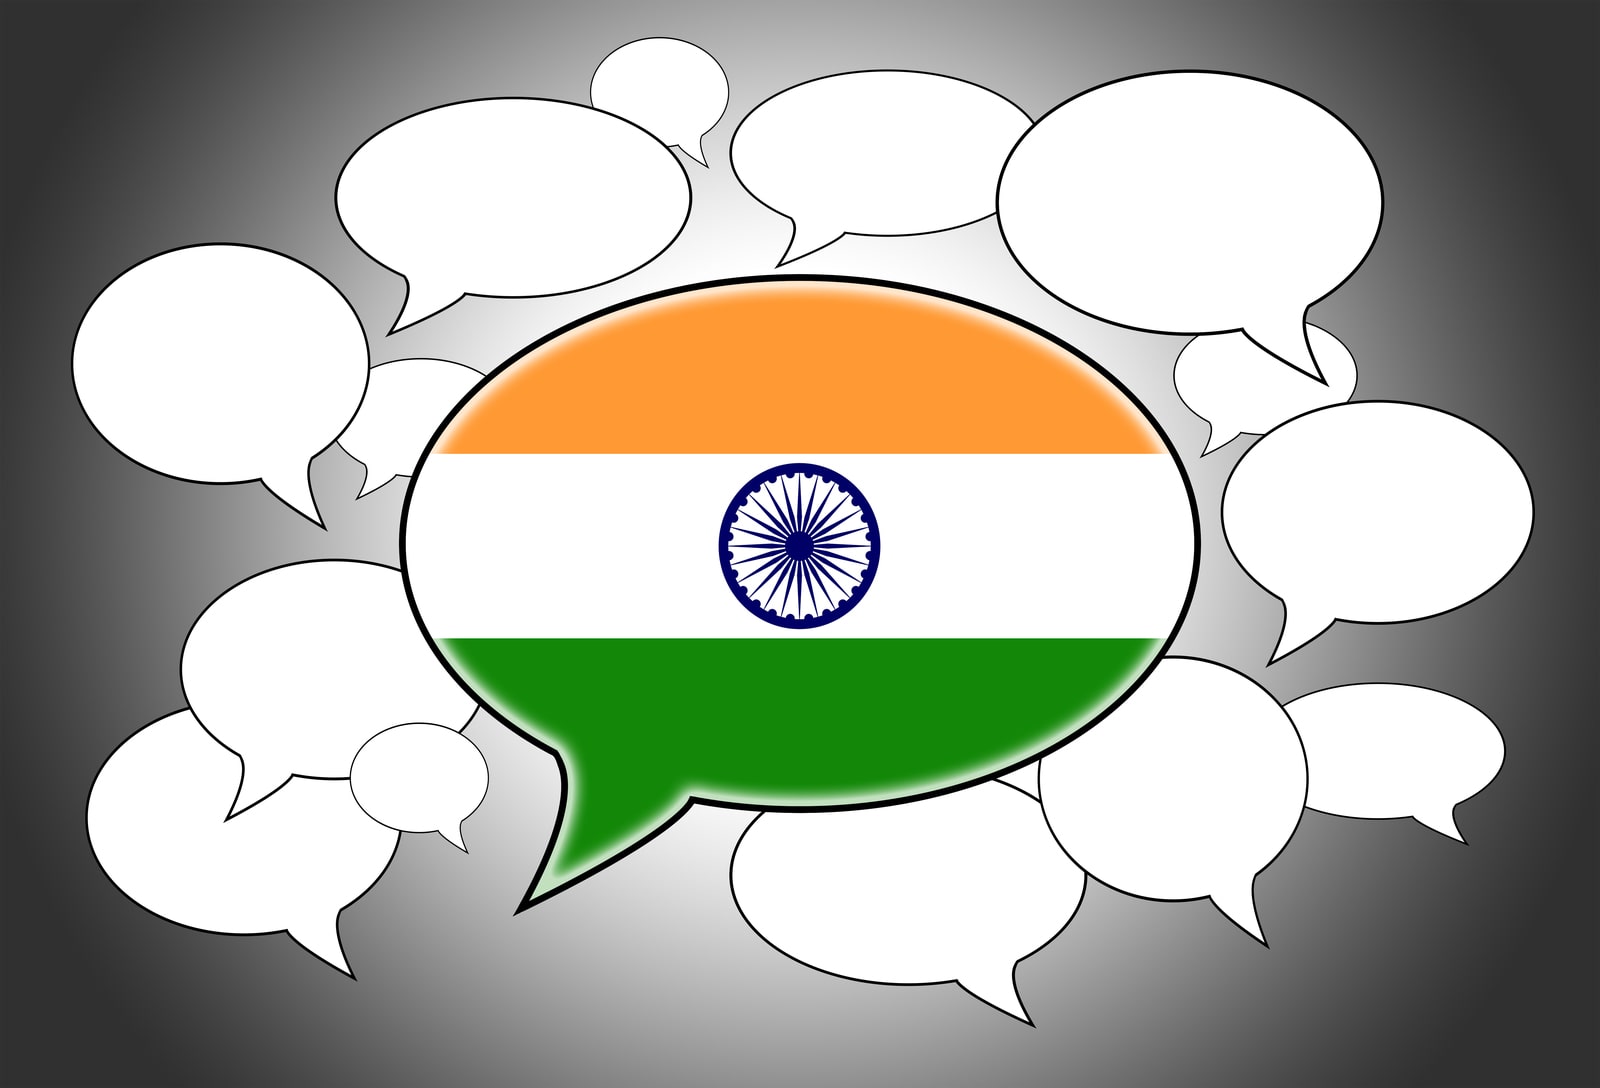 In India, a diversity of people live and speak different languages.